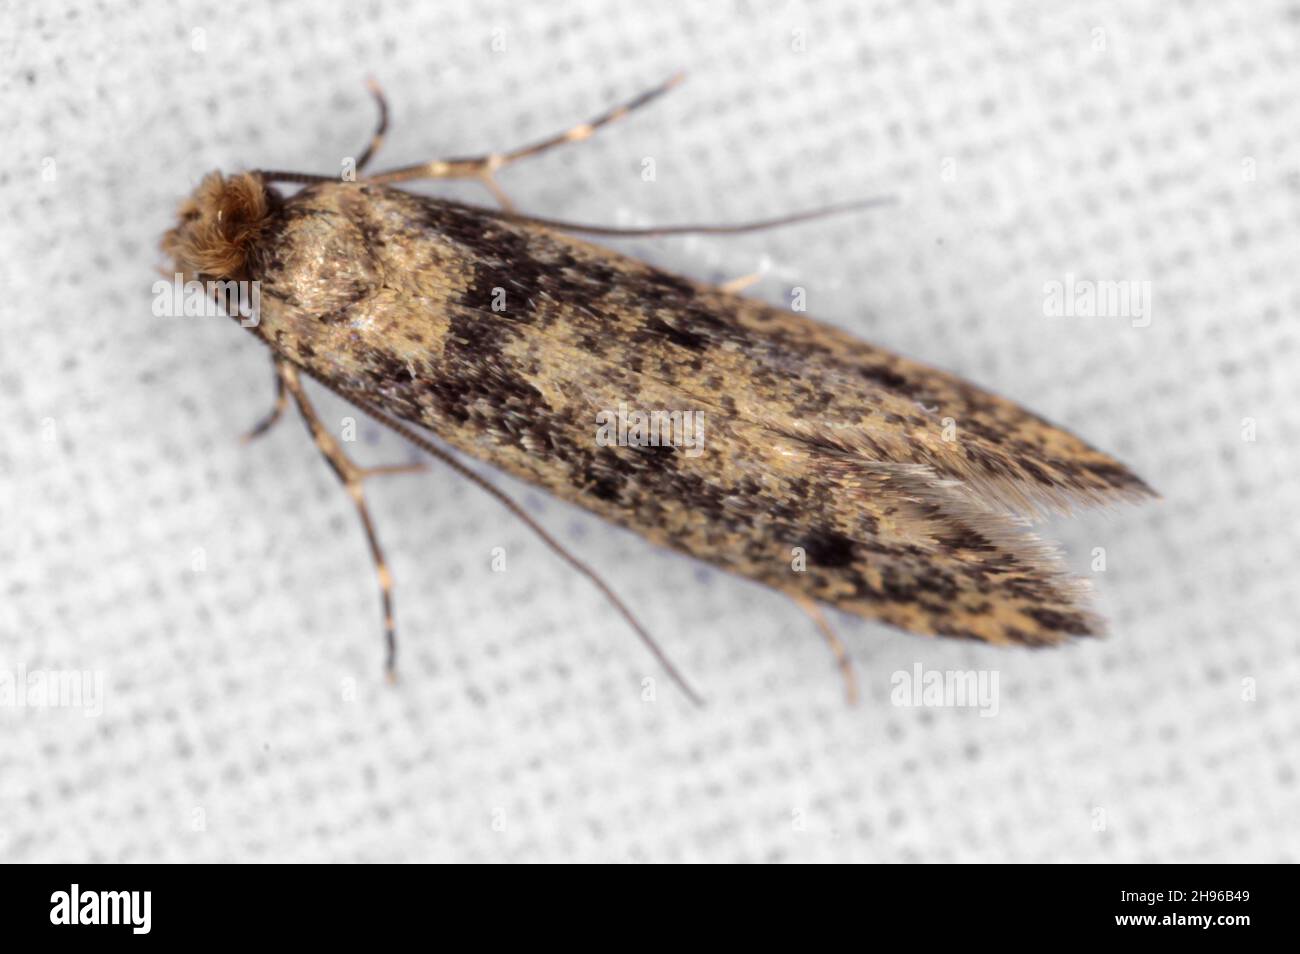 https://c8.alamy.com/comp/2H96B49/the-brown-dotted-clothes-moth-niditinea-fuscella-is-a-species-of-tineoid-moth-it-belongs-to-the-fungus-moth-family-tineidae-common-house-moth-2H96B49.jpg